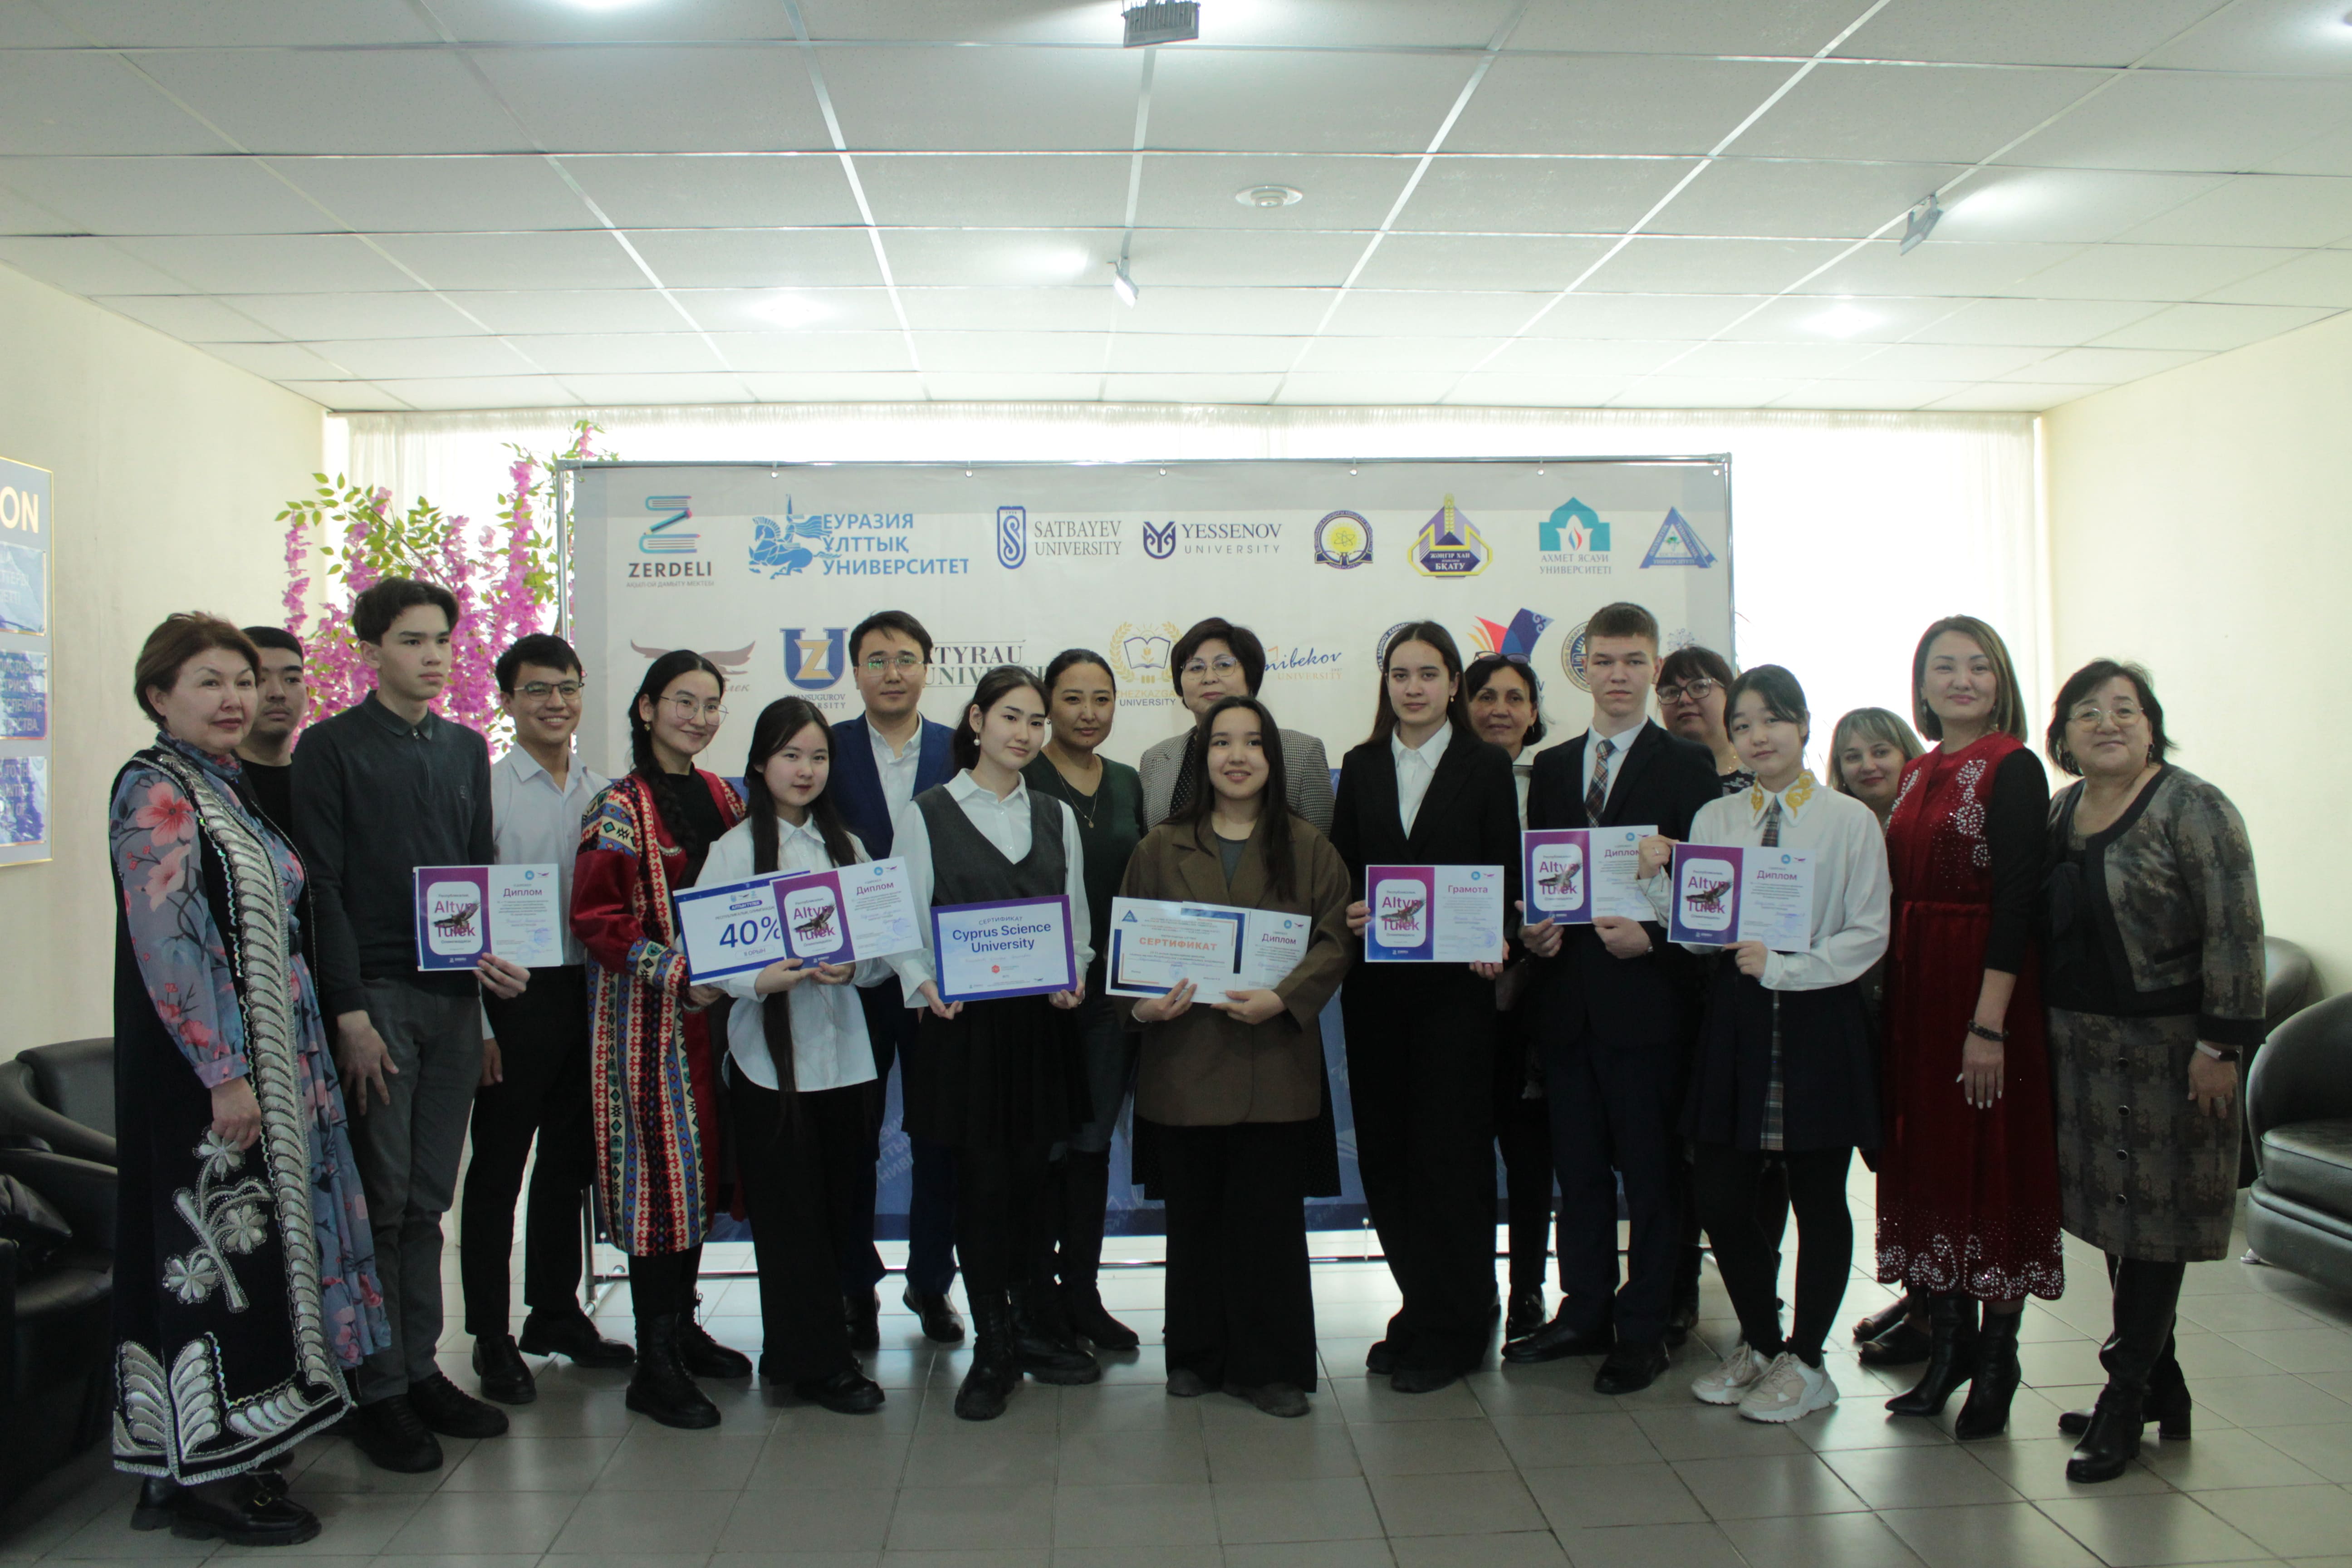 The winners of the Altyn Tulek Mathematical Olympiad received grants from our university